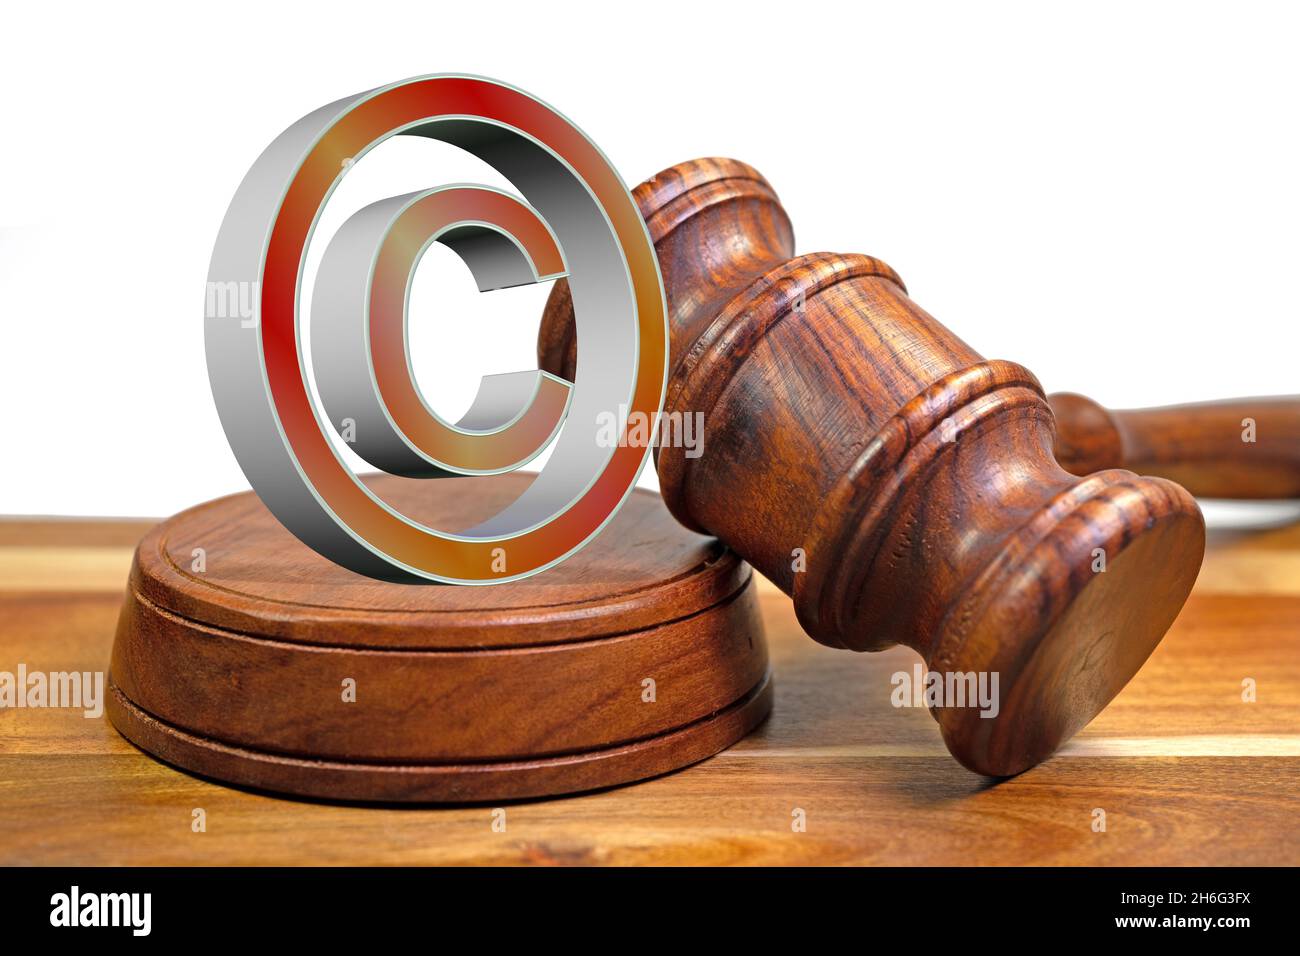 Copyright sign and judge gavel in a close-up, 3d-illustration Stock Photo